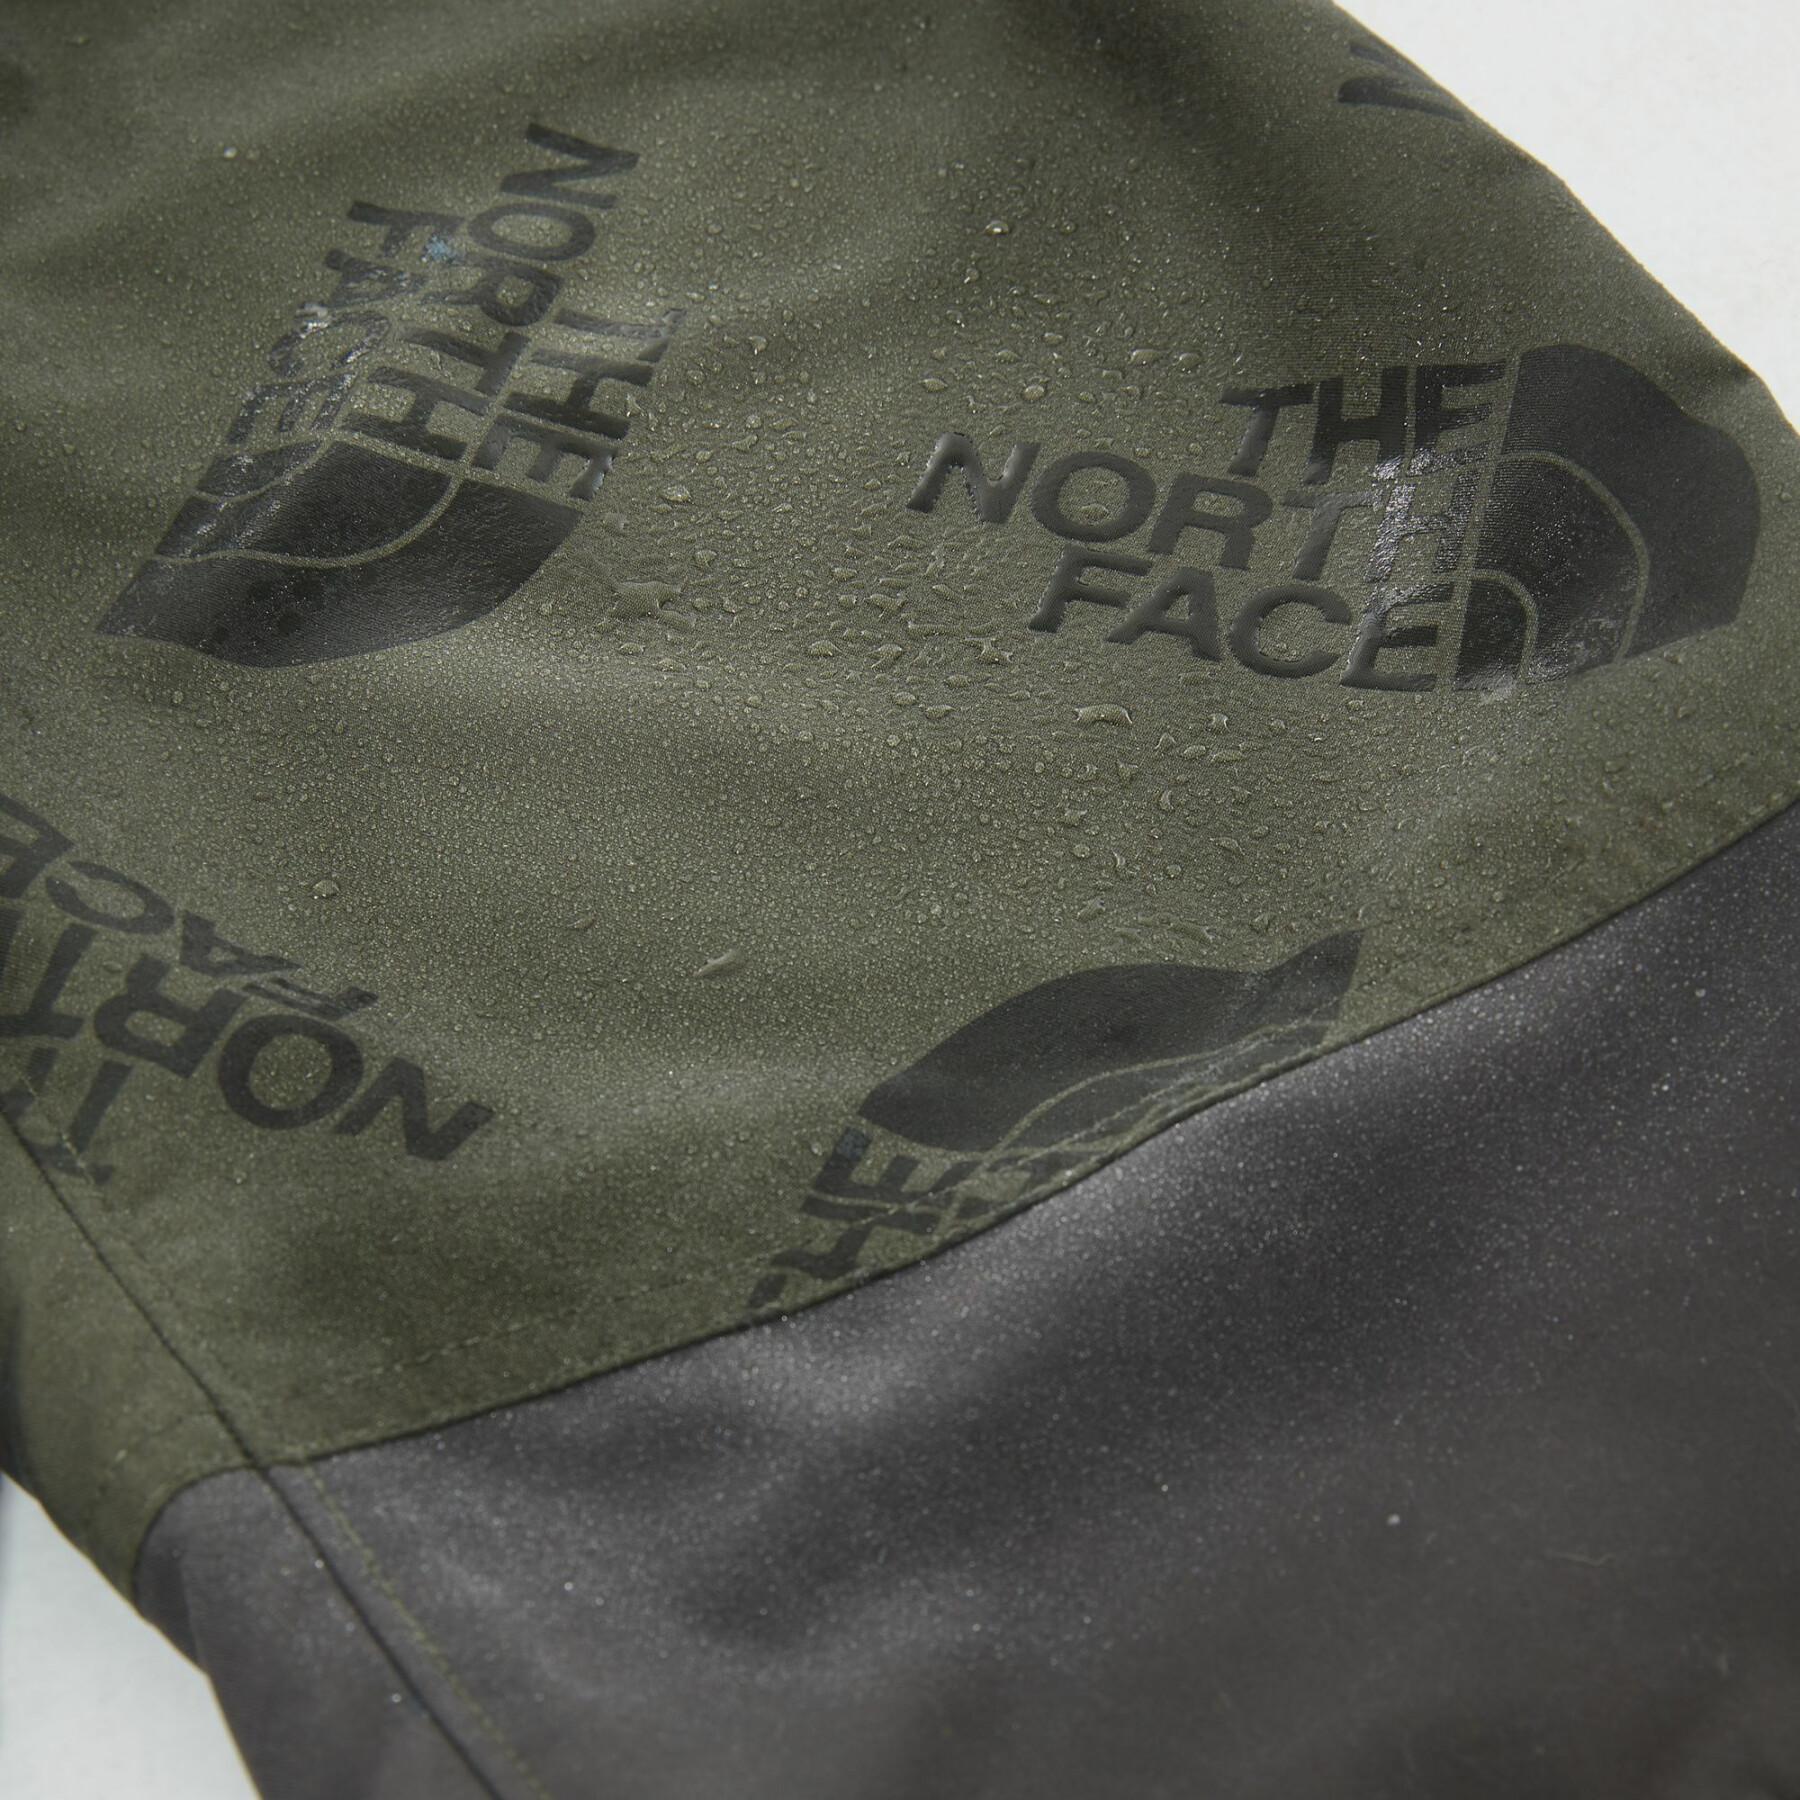 Children's swimming shorts The North Face Class V